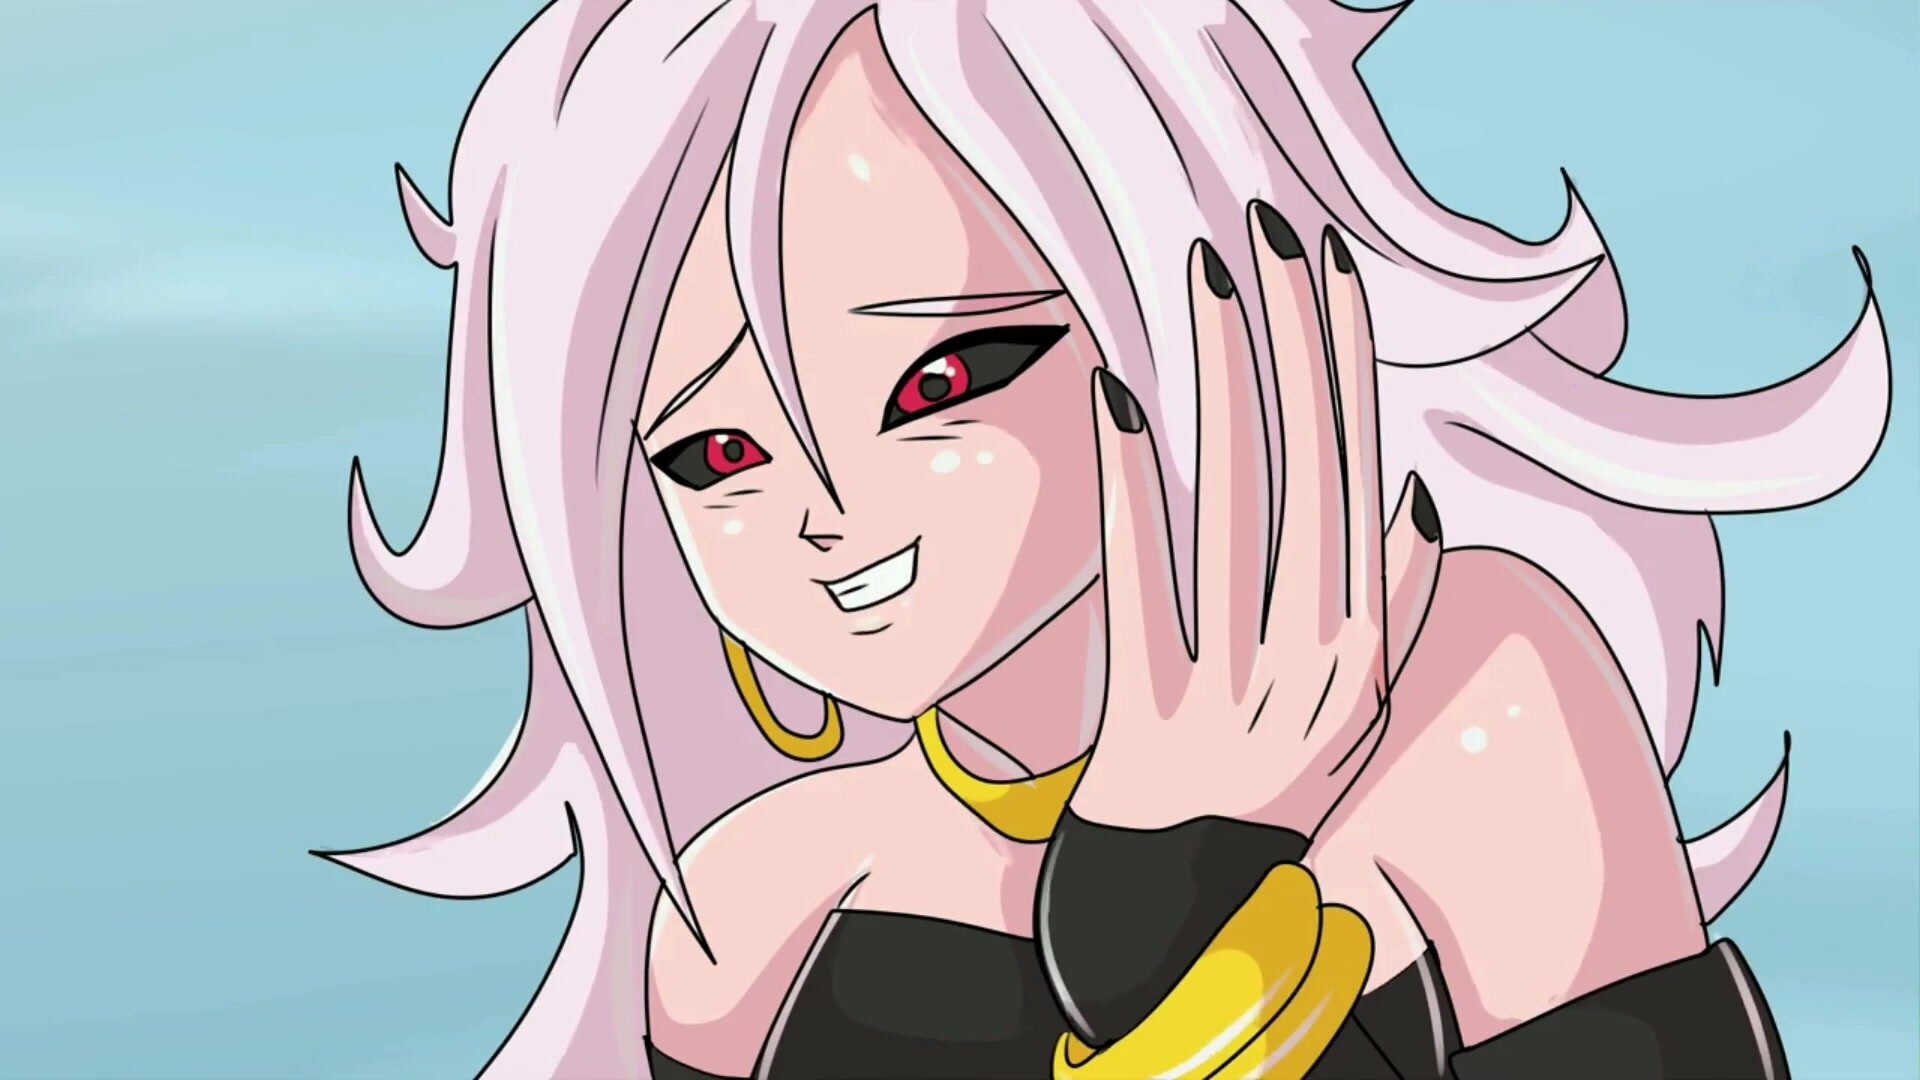 Android 21 Absorbs Kefla (Vore)